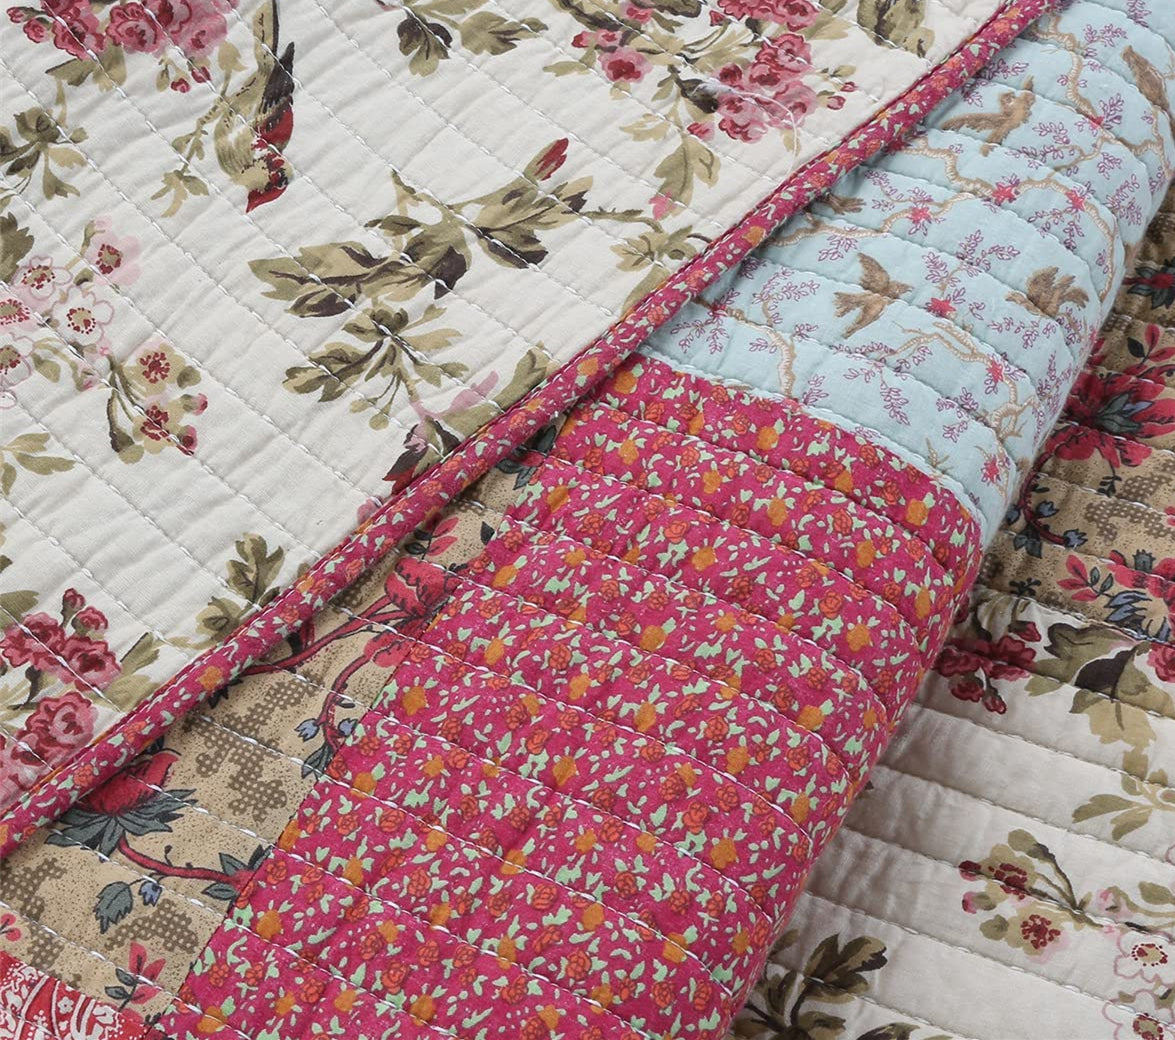 Pure Cotton Adeline Red Teal Khaki Floral Pint Pattern 3 Pieces Quilt Set with 2 Pillowcases